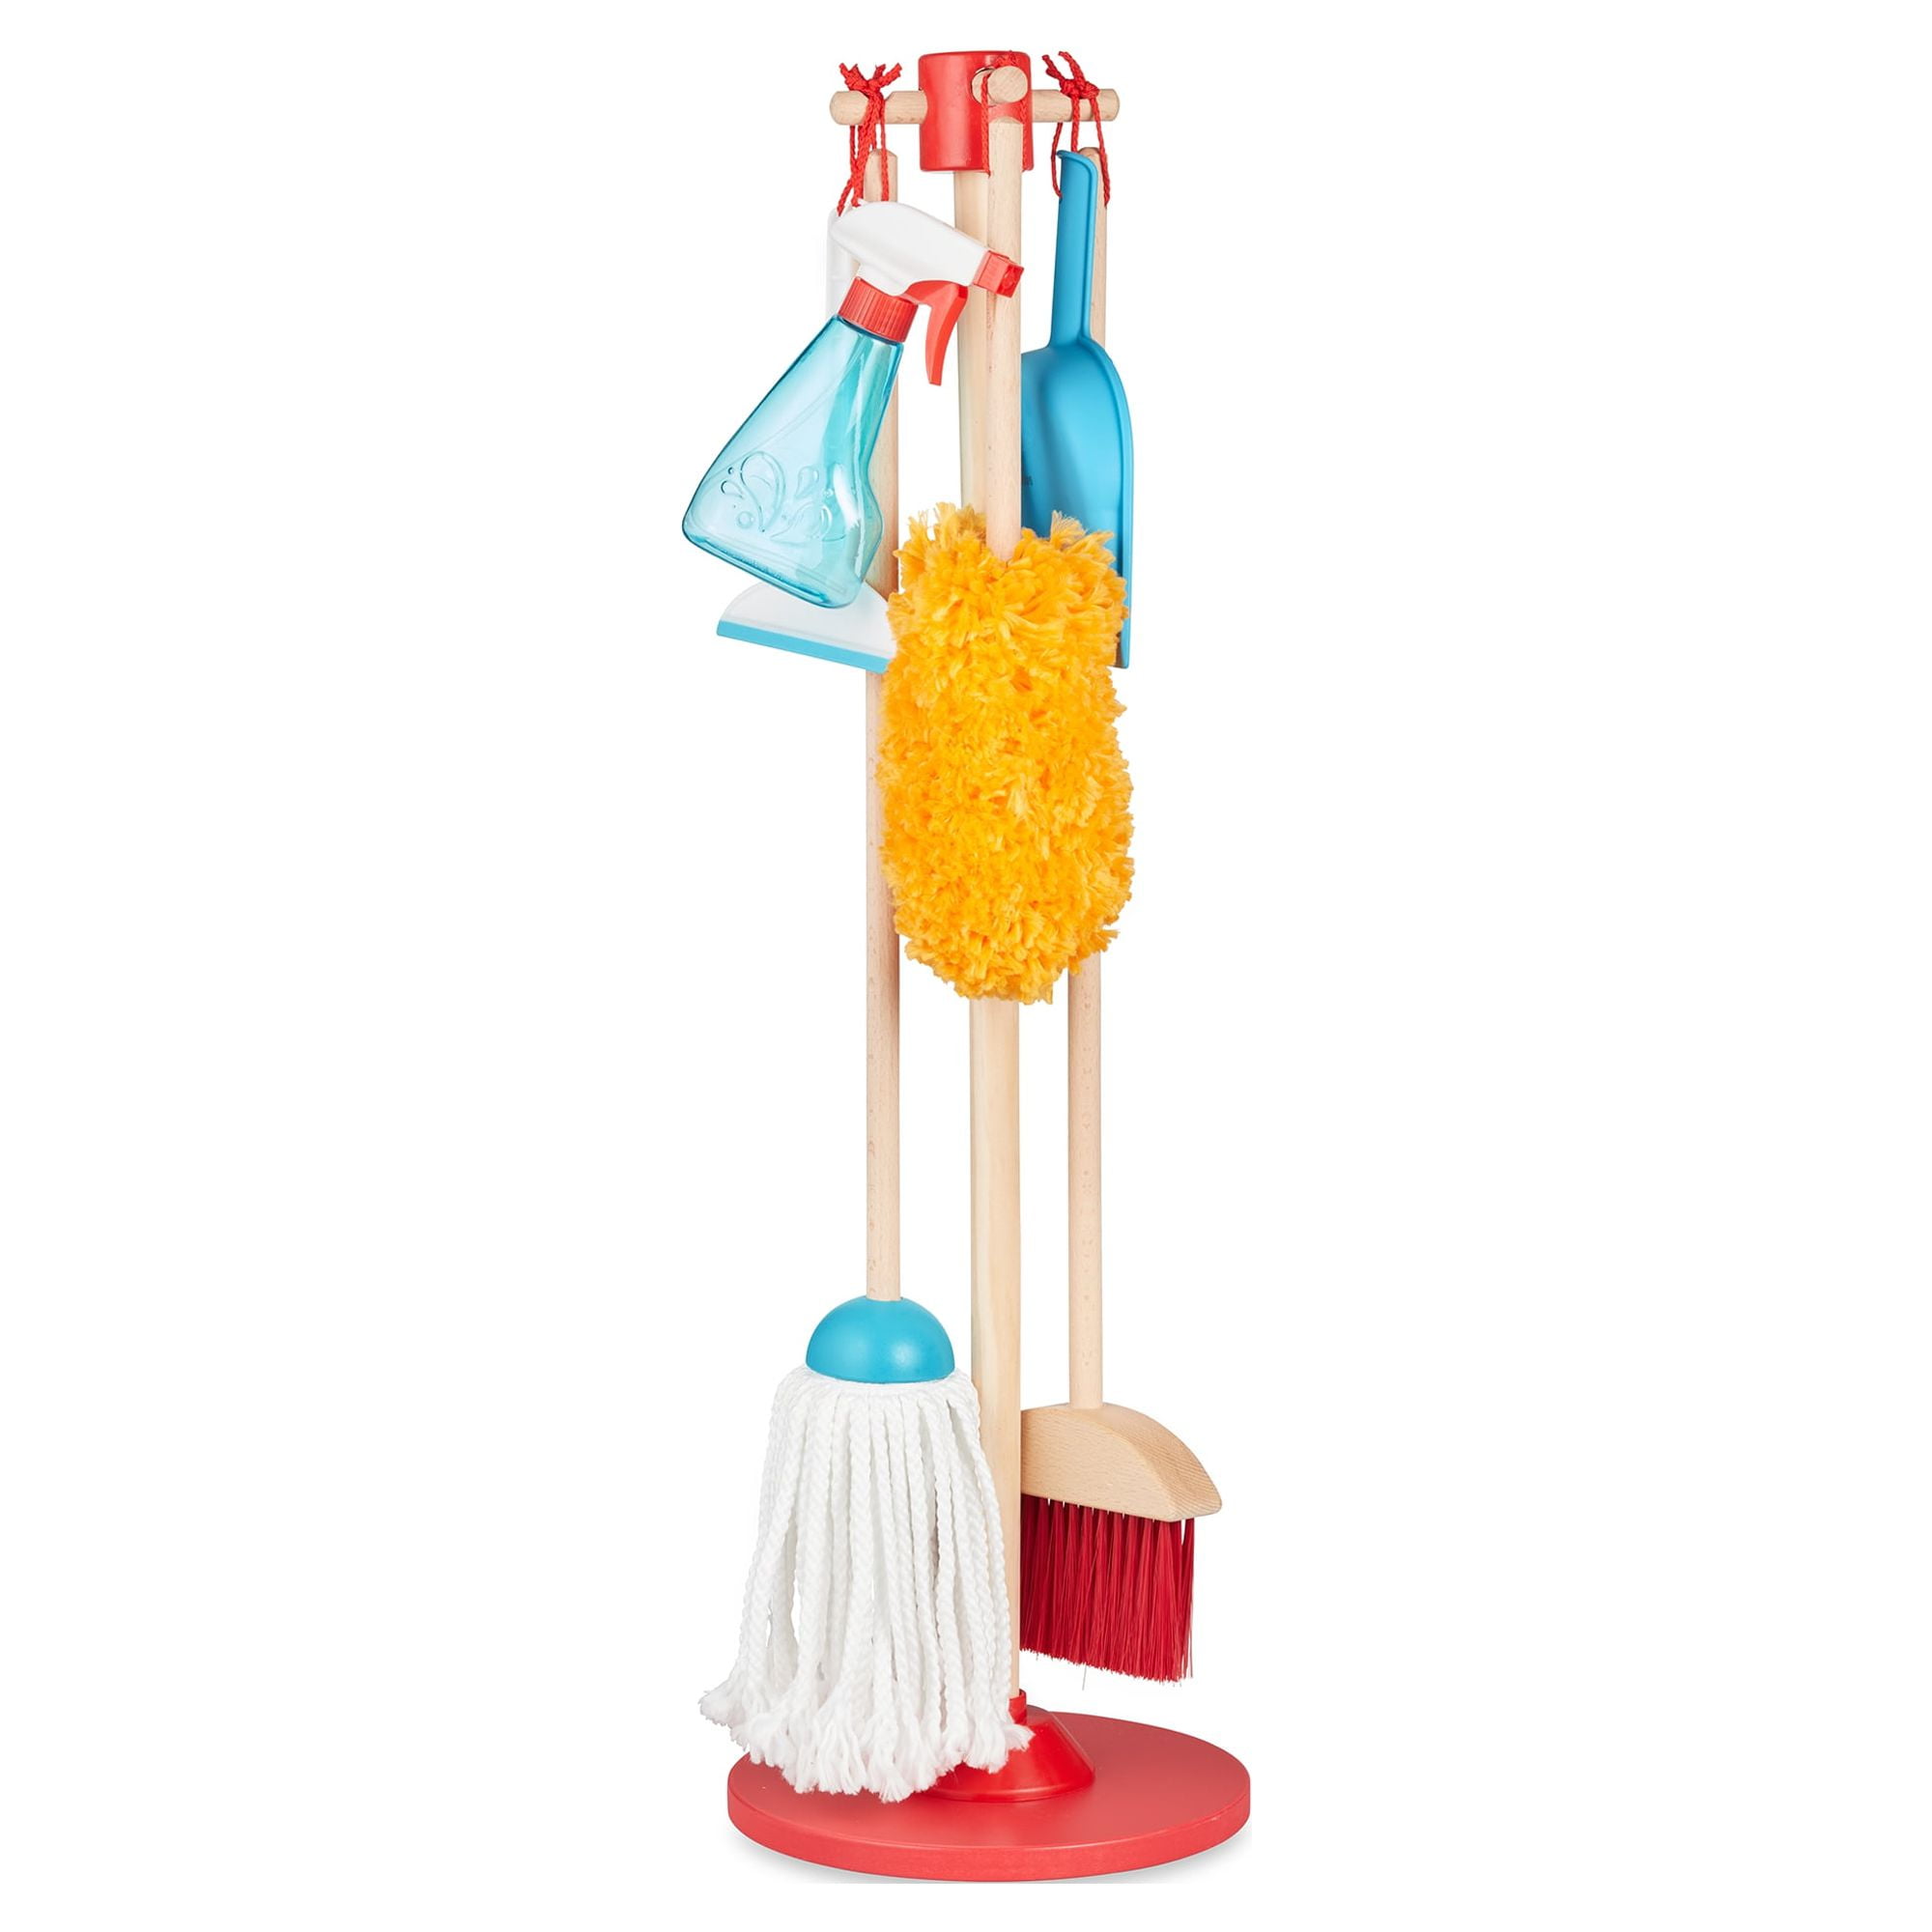 Melissa & Doug Kids Cleaning Set 6 pieces - Fun and education! unisex  (bambini)